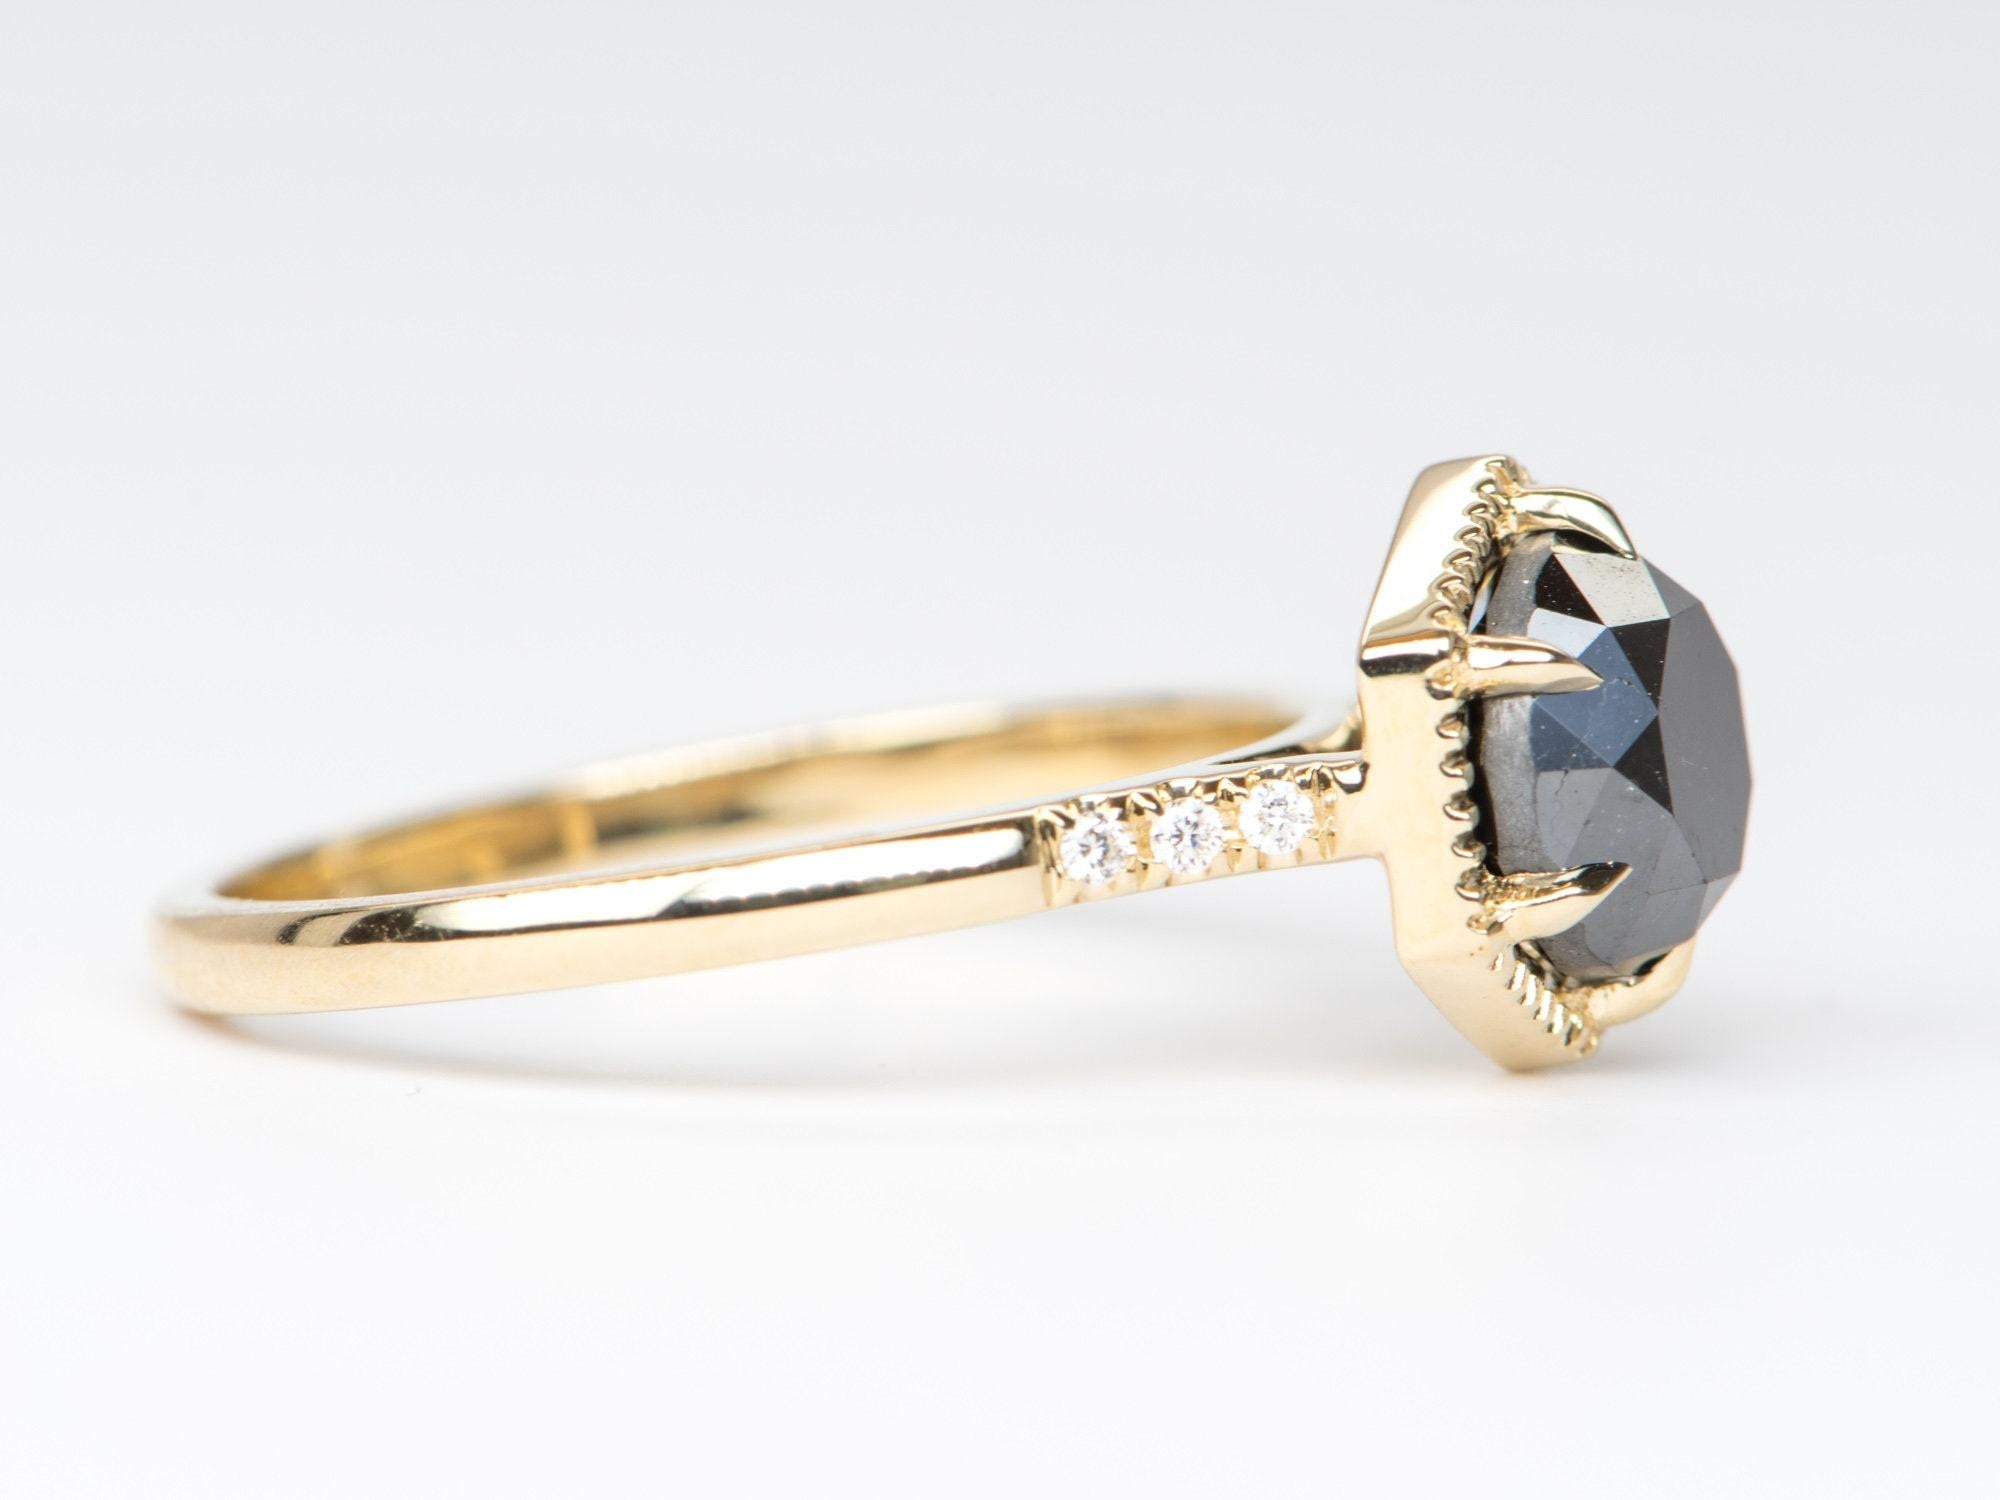 â™¥ Solid 14K yellow gold ring set with a hexagon shaped round brilliant cut black diamond in the center
â™¥ A milgrain edge setting surrounds the main stone and a trip of diamonds accent the band on each side


â™¥ US Size 7 (Free resizing up or